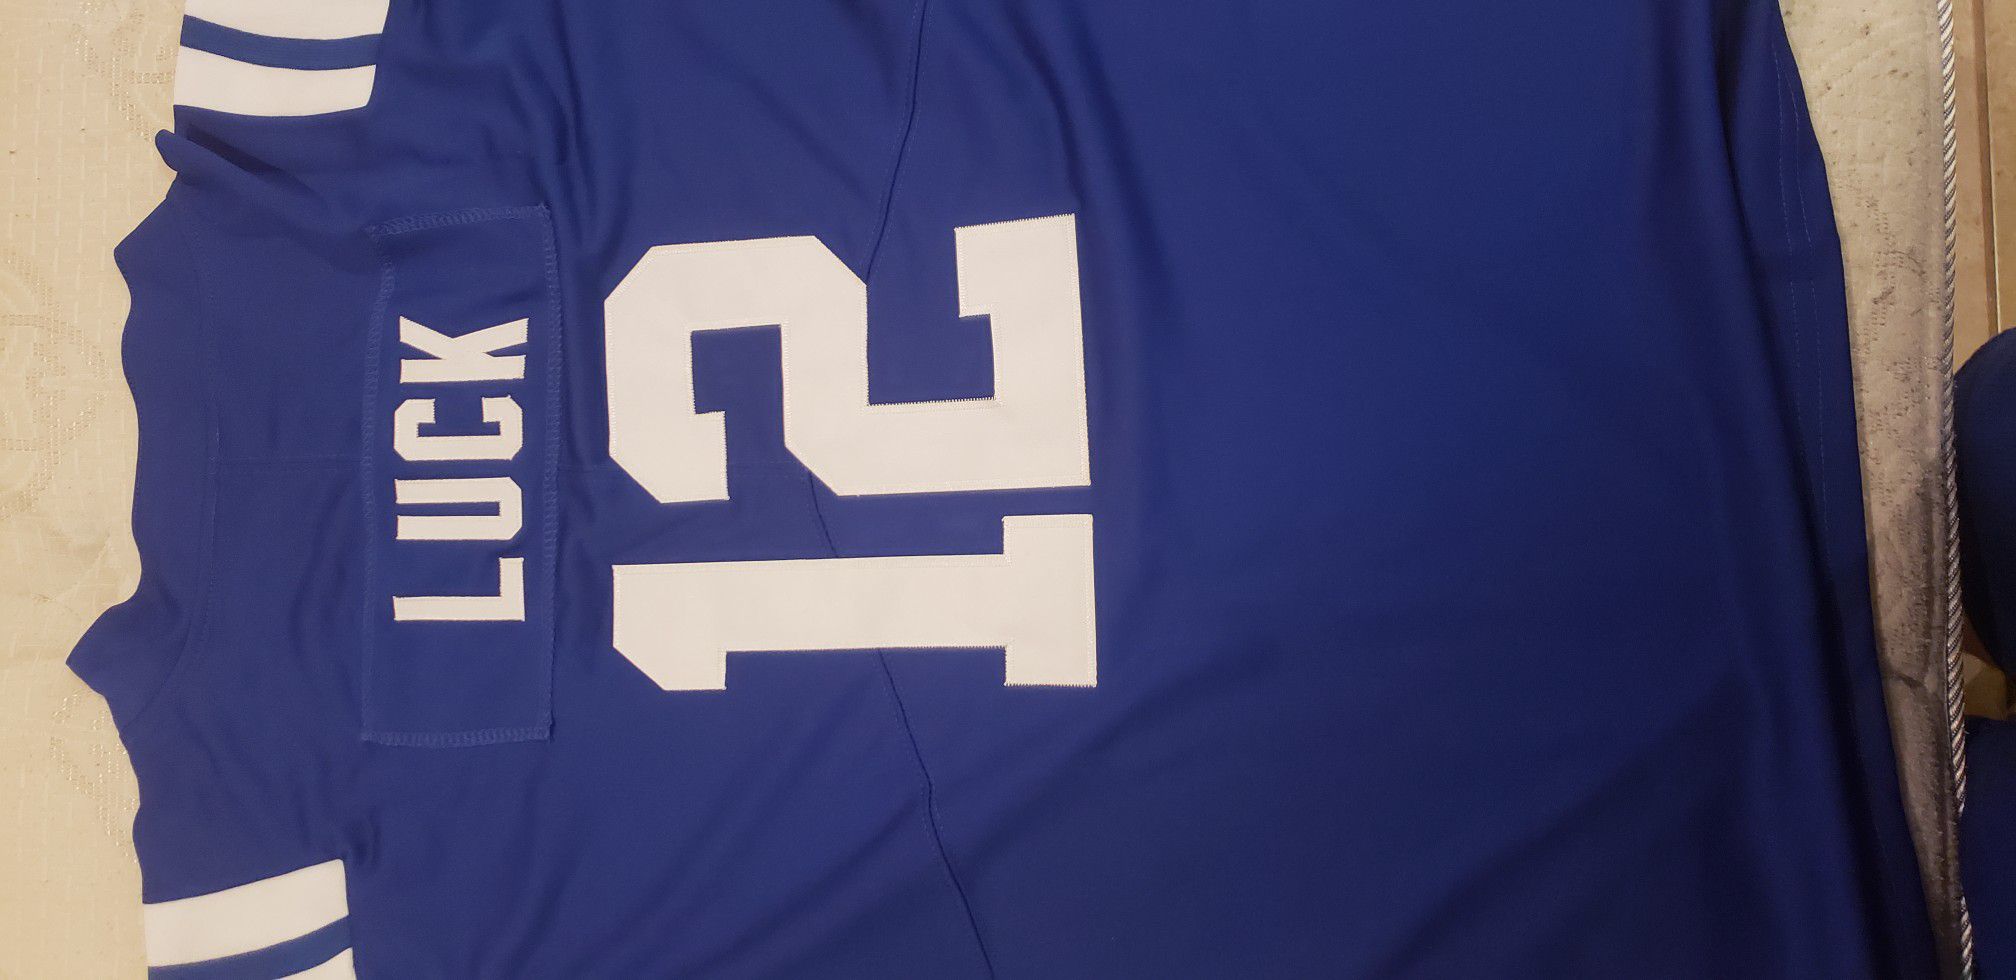 Andrew Luck jersey